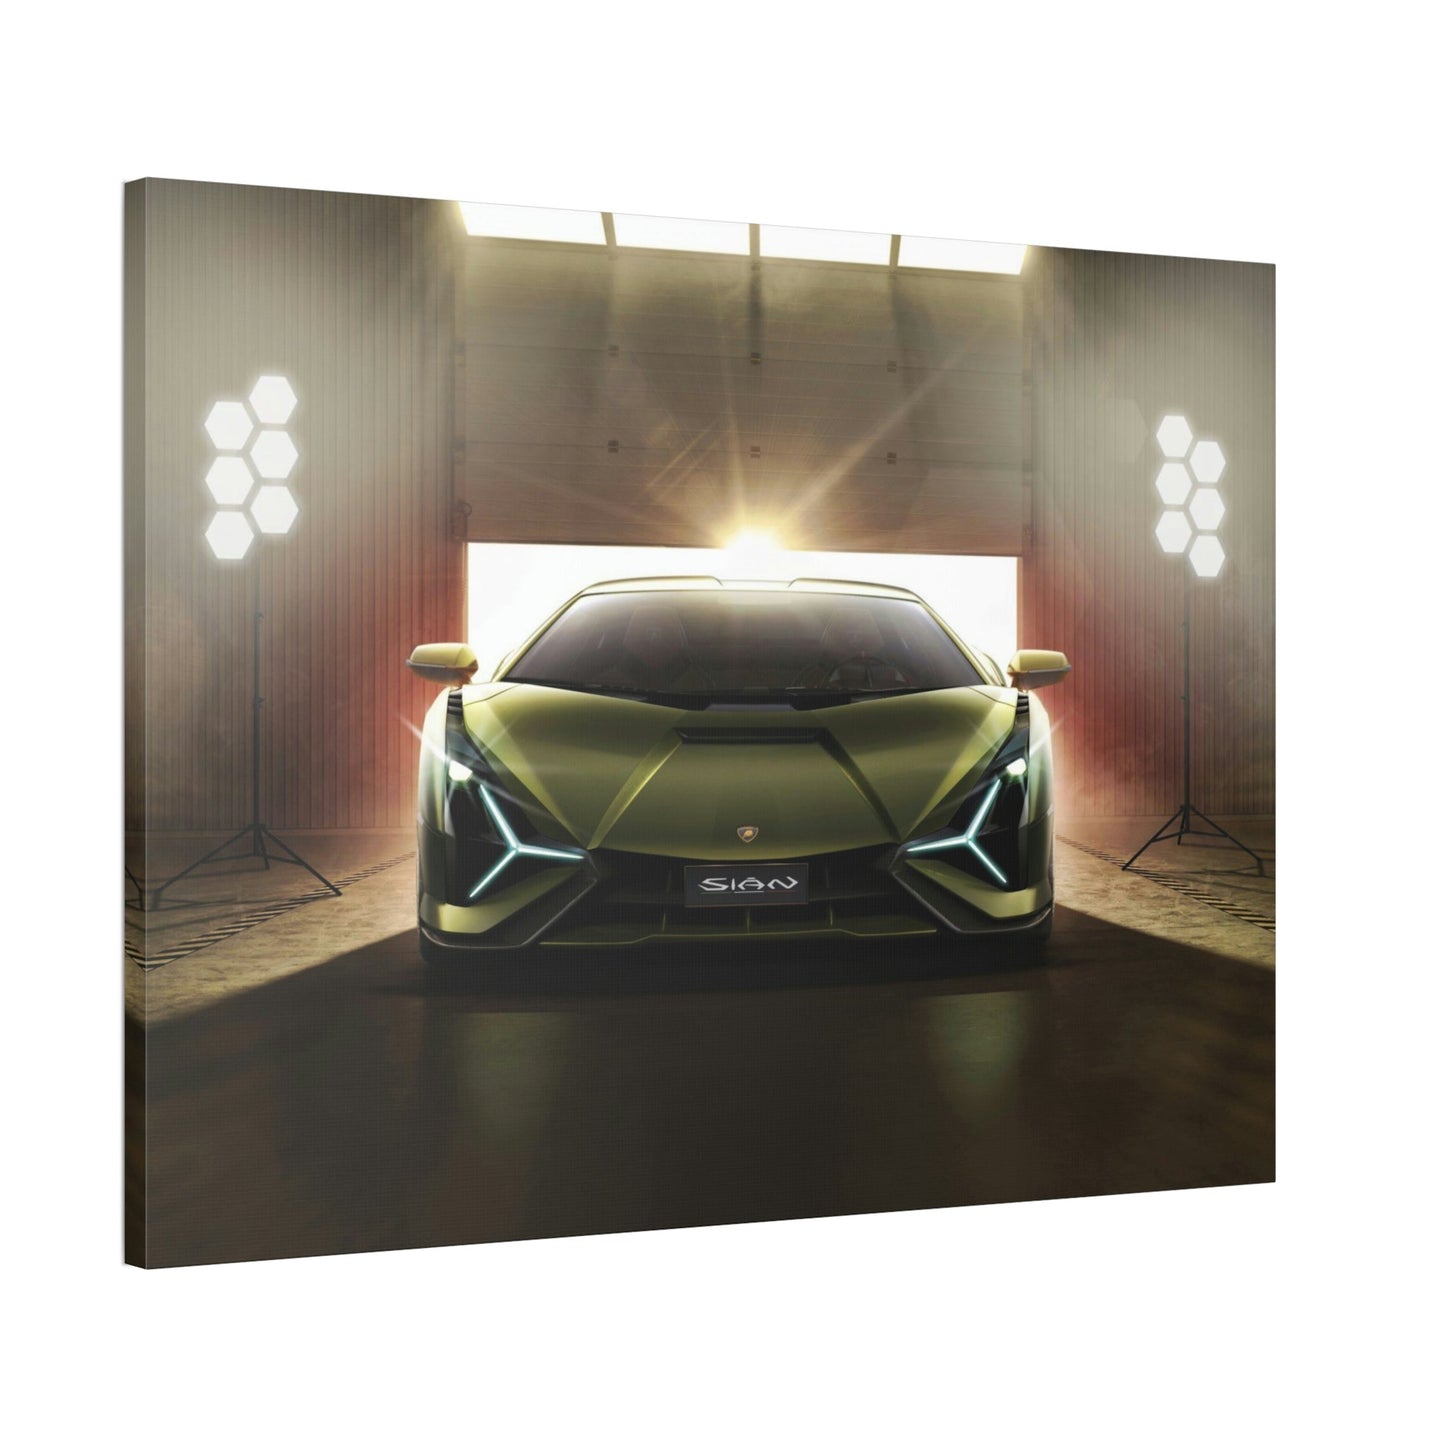 Sleek and Stylish: Modern Canvas Wall Art of Lamborghini for Your Home